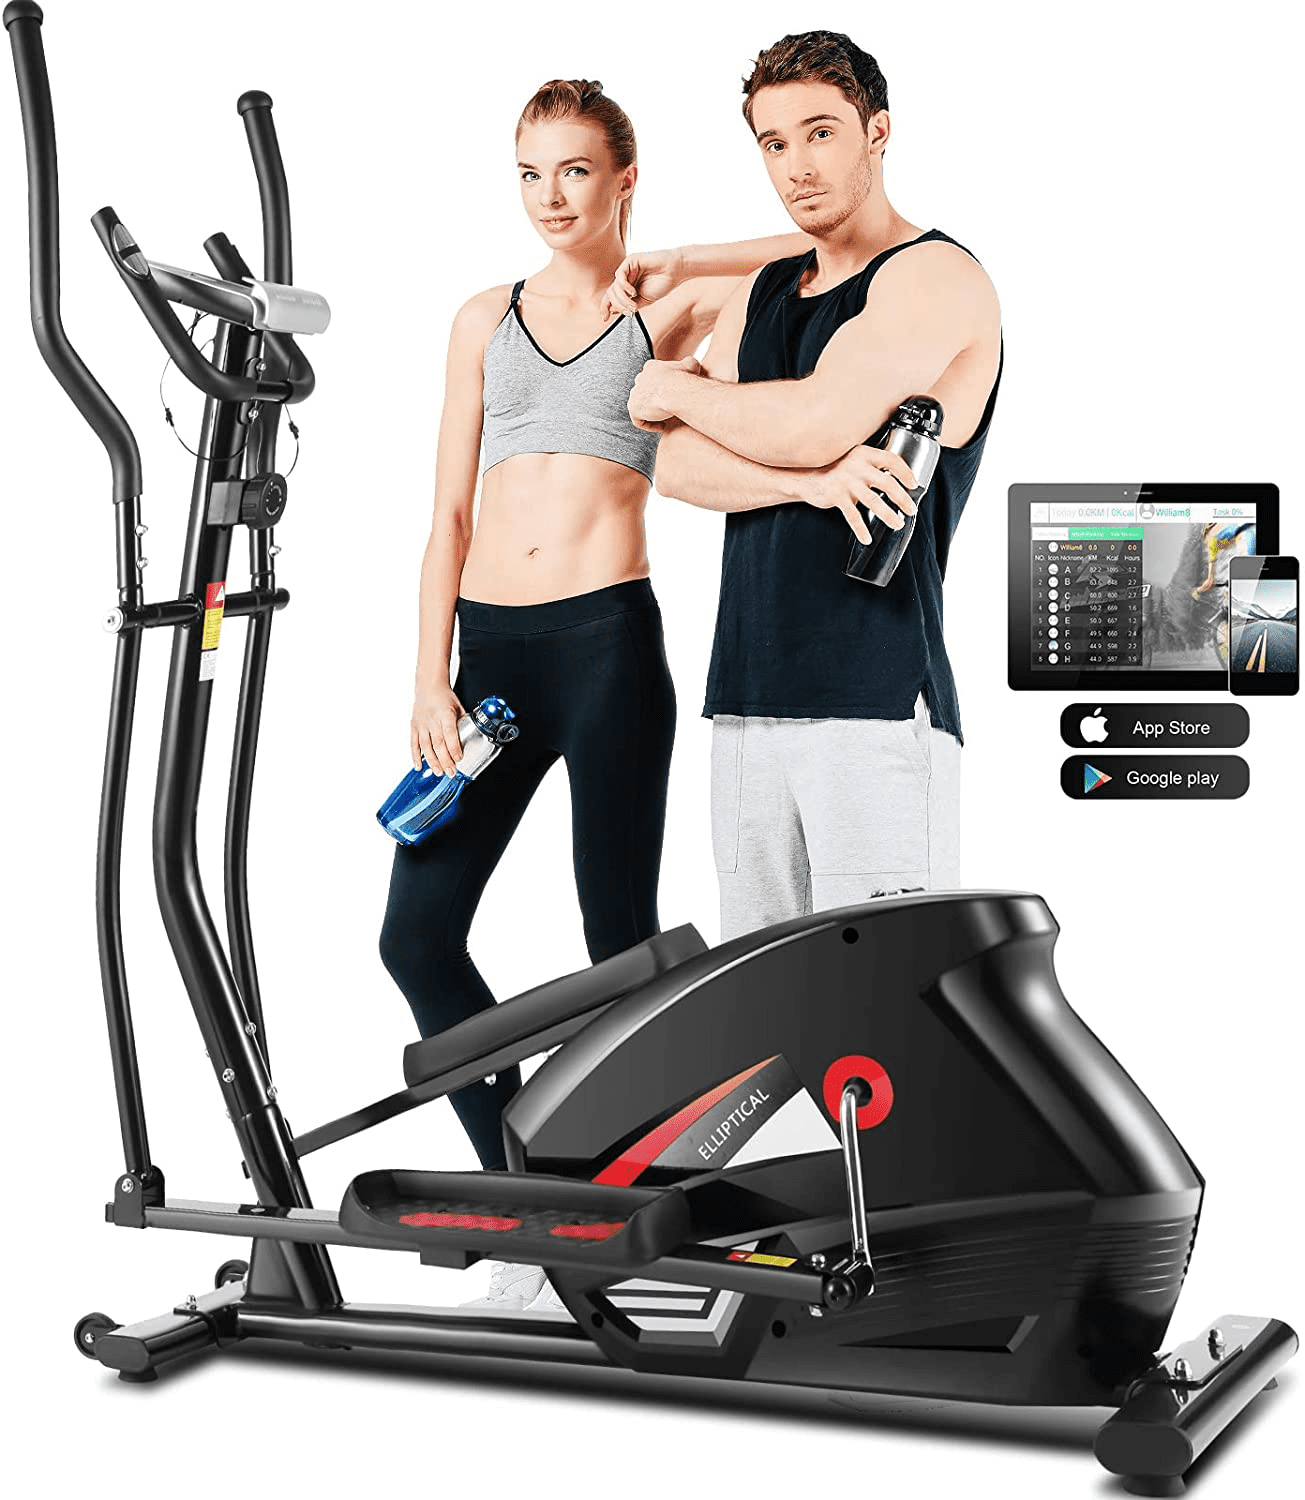 Enhanced LCD Monitor ANCHEER APP Elliptical Machine Elliptical Trainer with 10 Level of Magnetic Resistence Levels Heart Rate Sensor APP & 390lbs Weight Capacity for Home Gym 